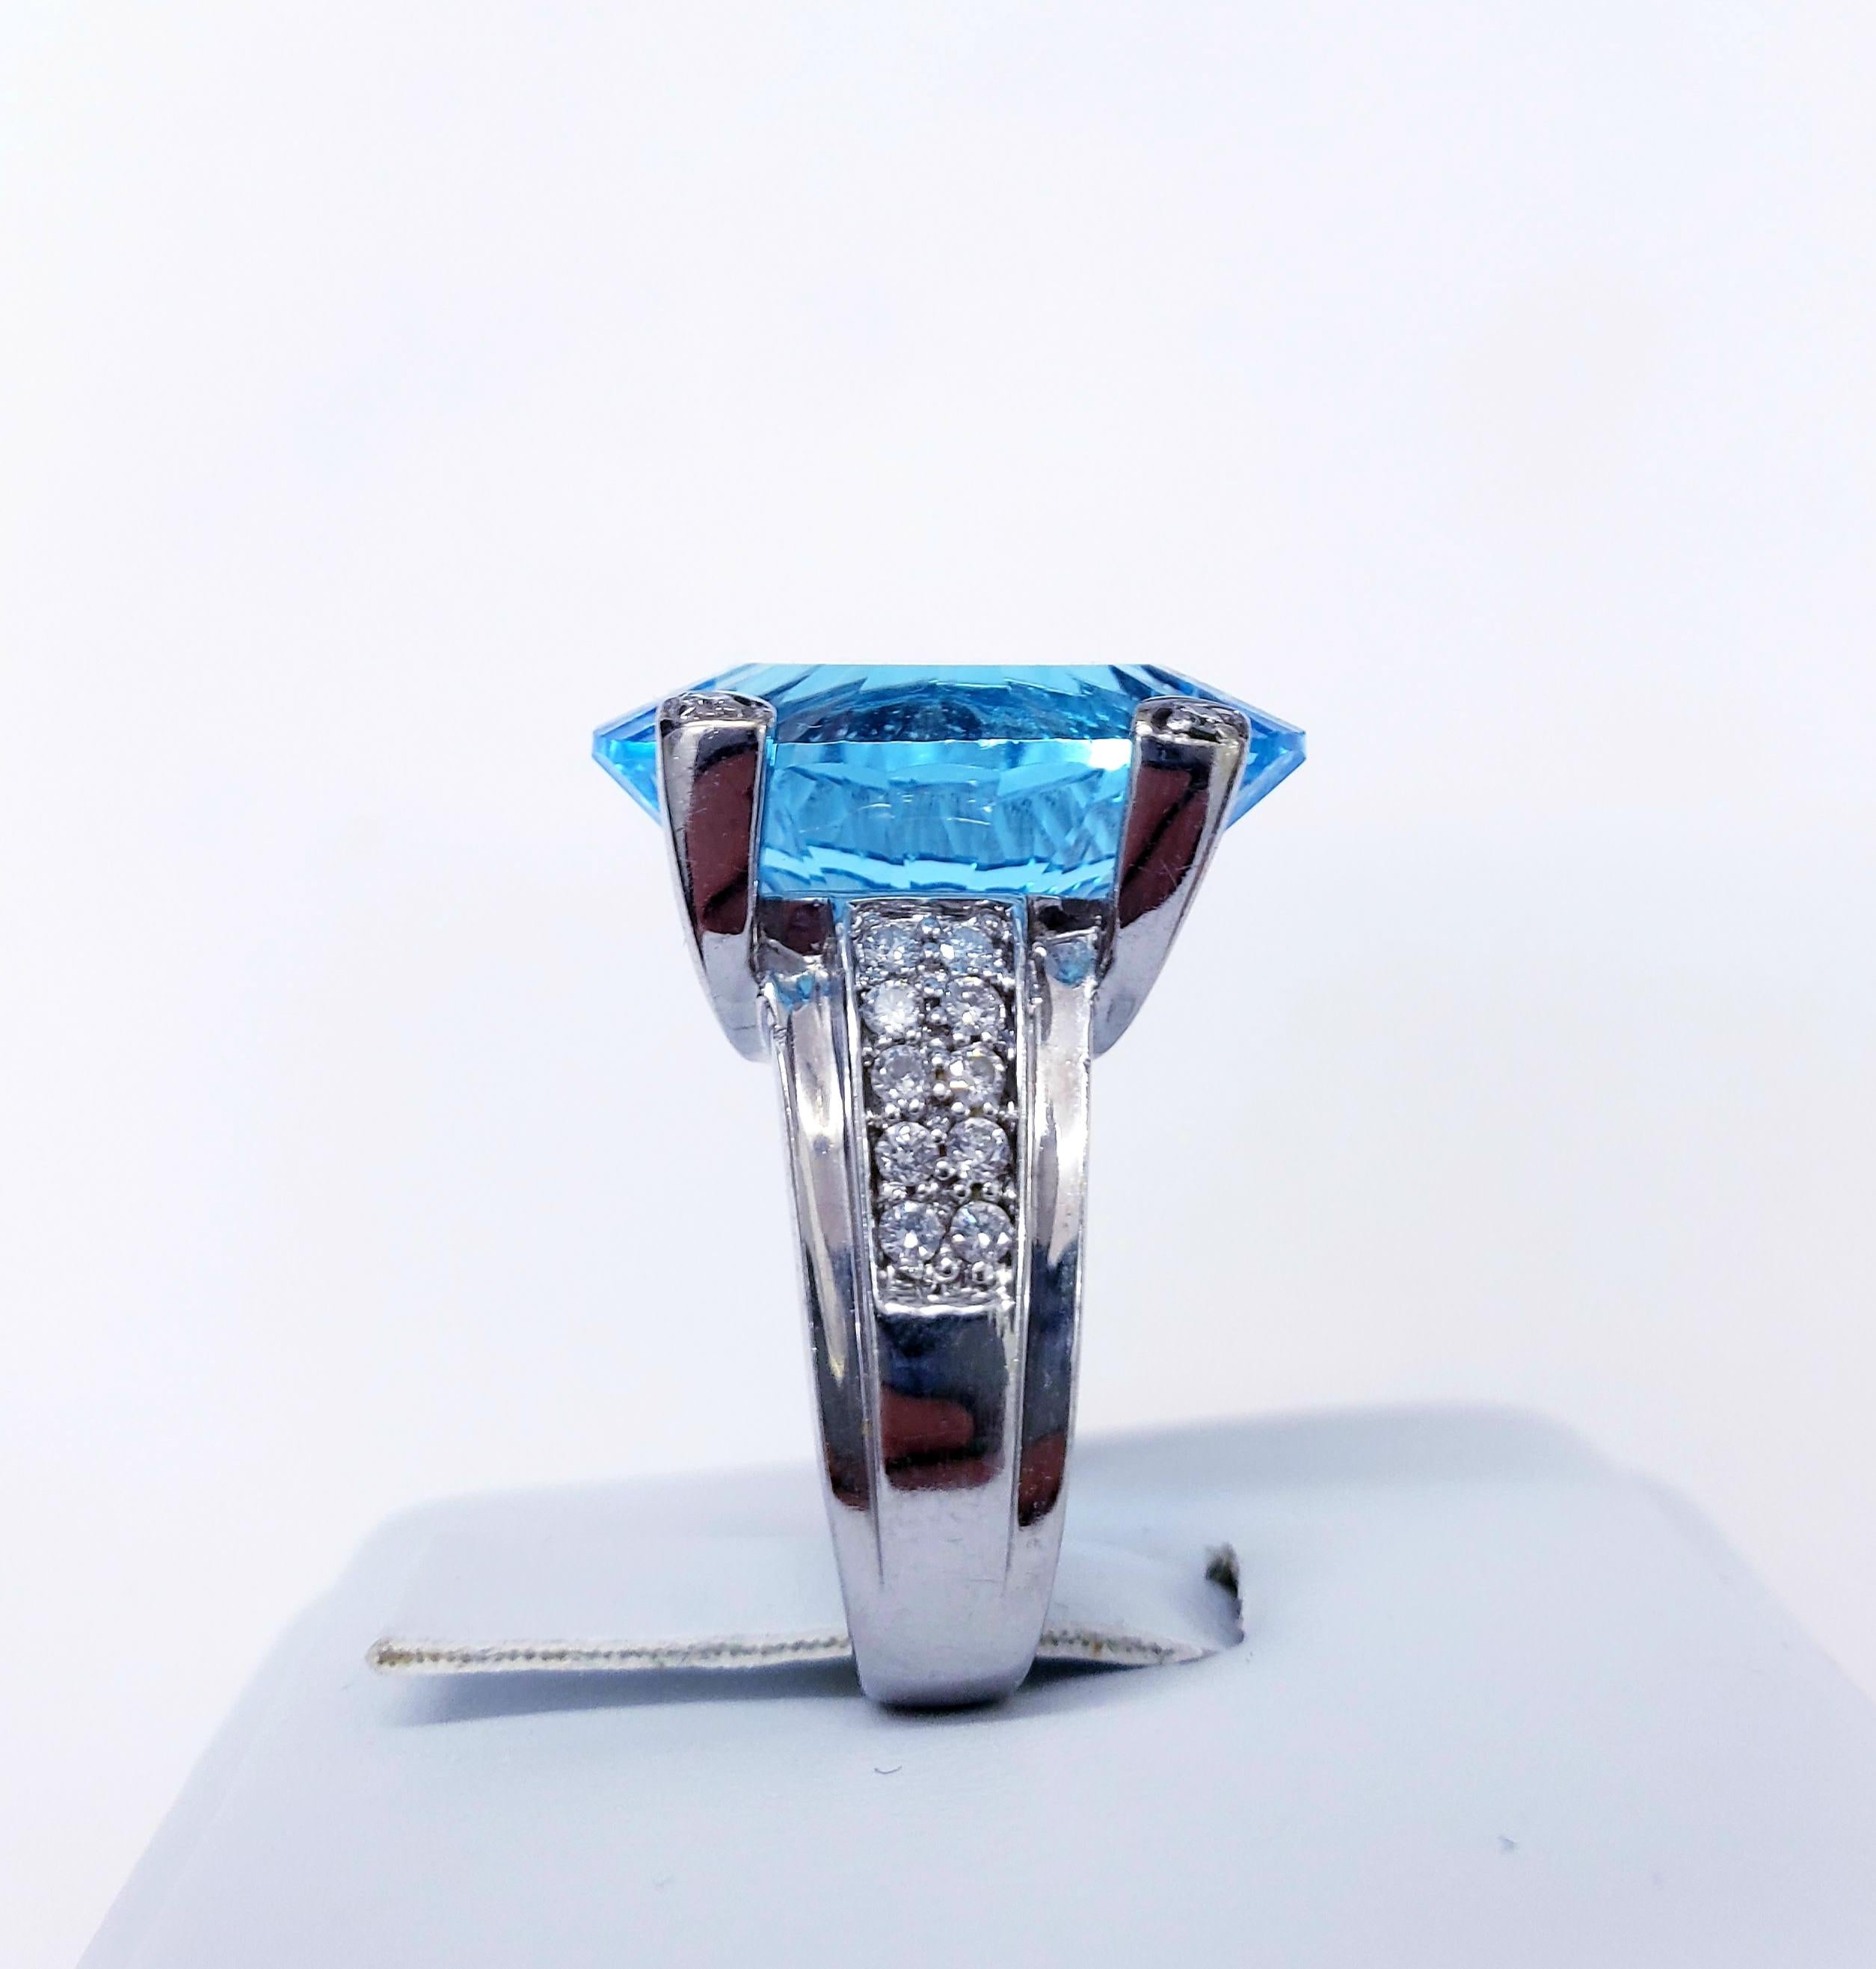 Extravagant 17.00 Carat Concave Oval Blue Topaz Diamond Cocktail Ring 18k White In Good Condition For Sale In Miami, FL